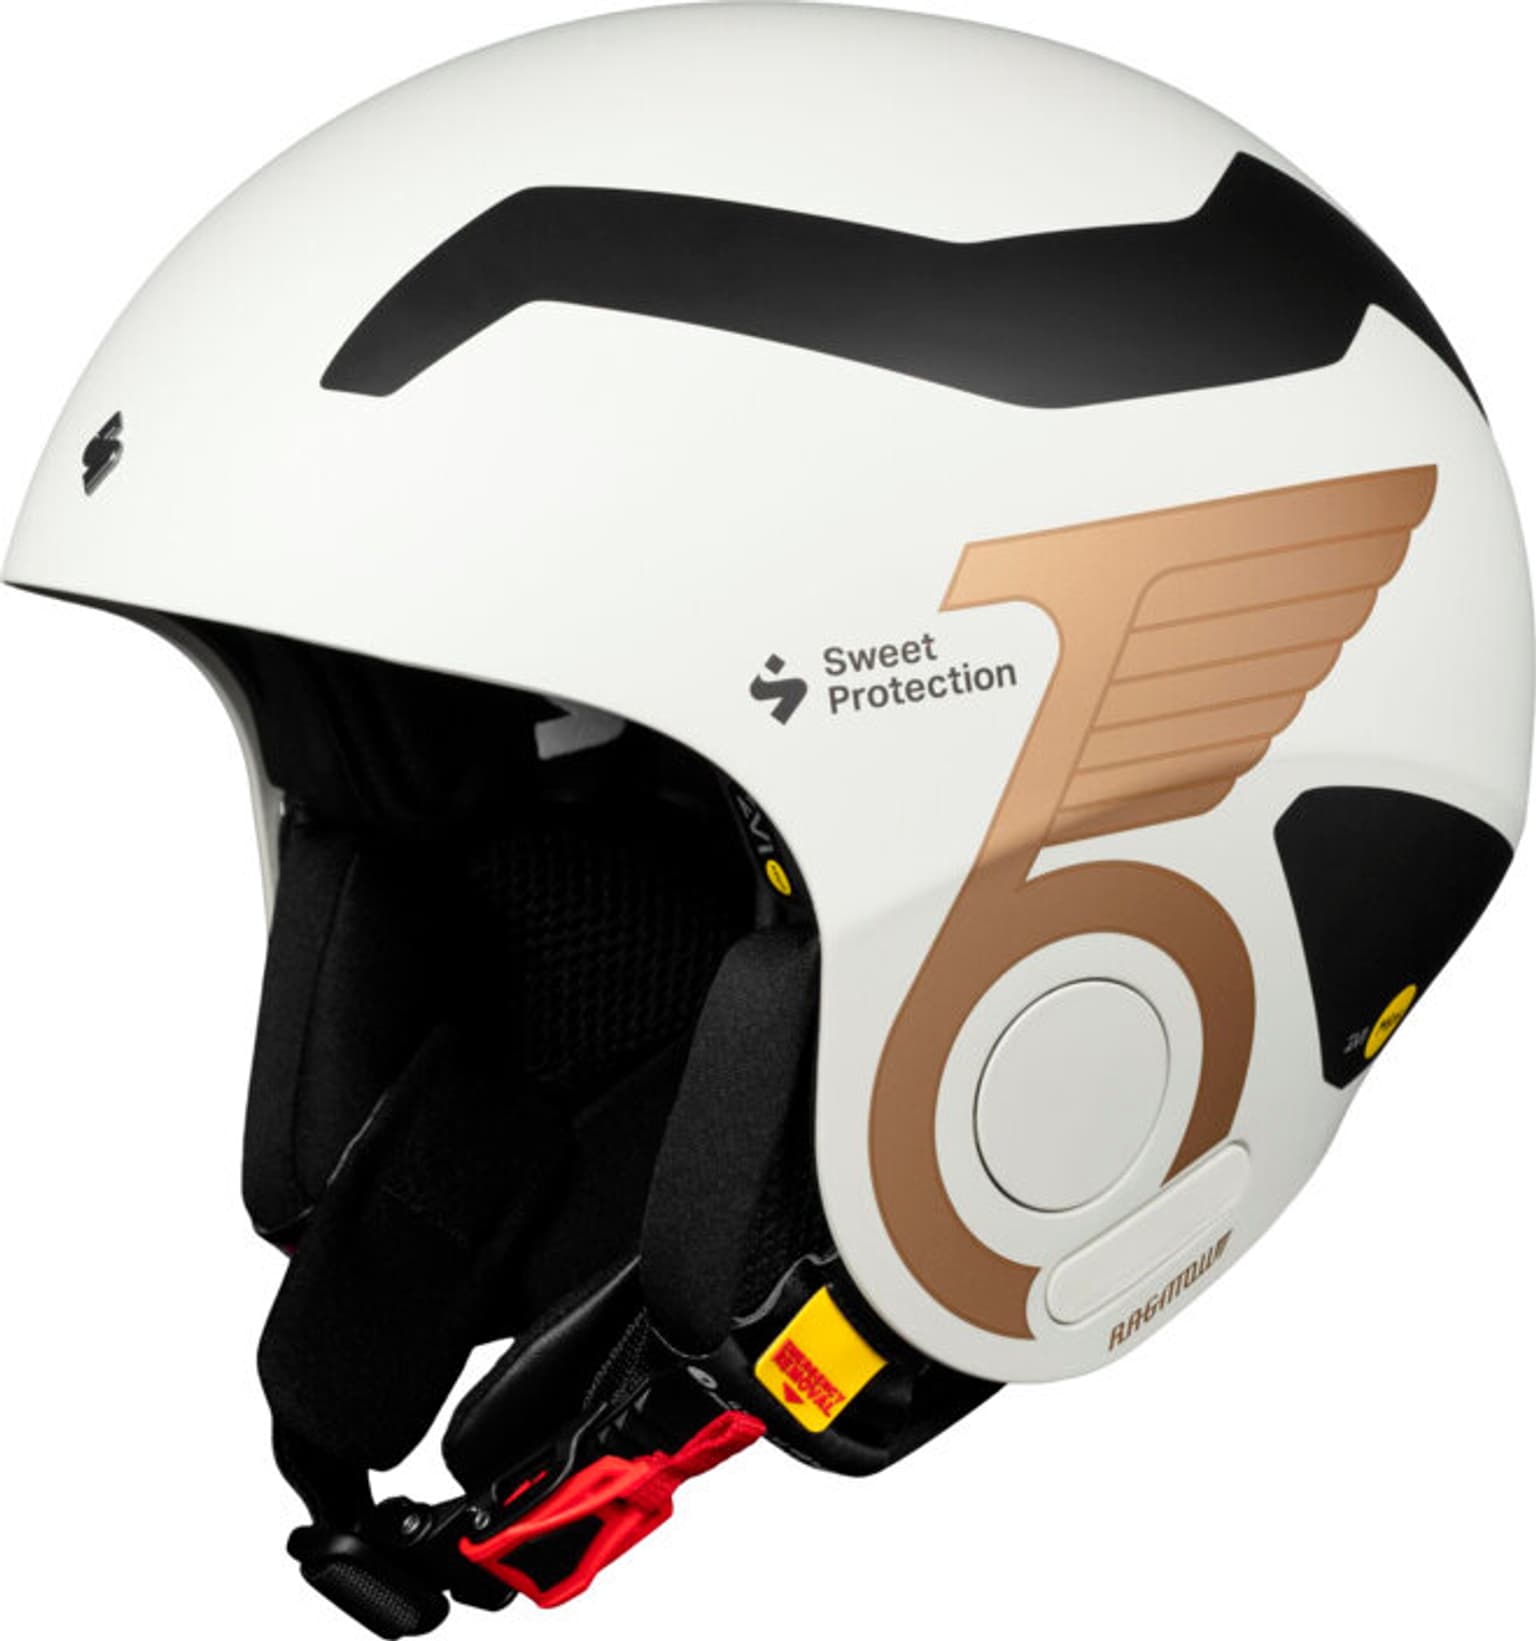 Sweet Protection Sweet Protection Volata 2Vi Mips Skihelm weiss 1